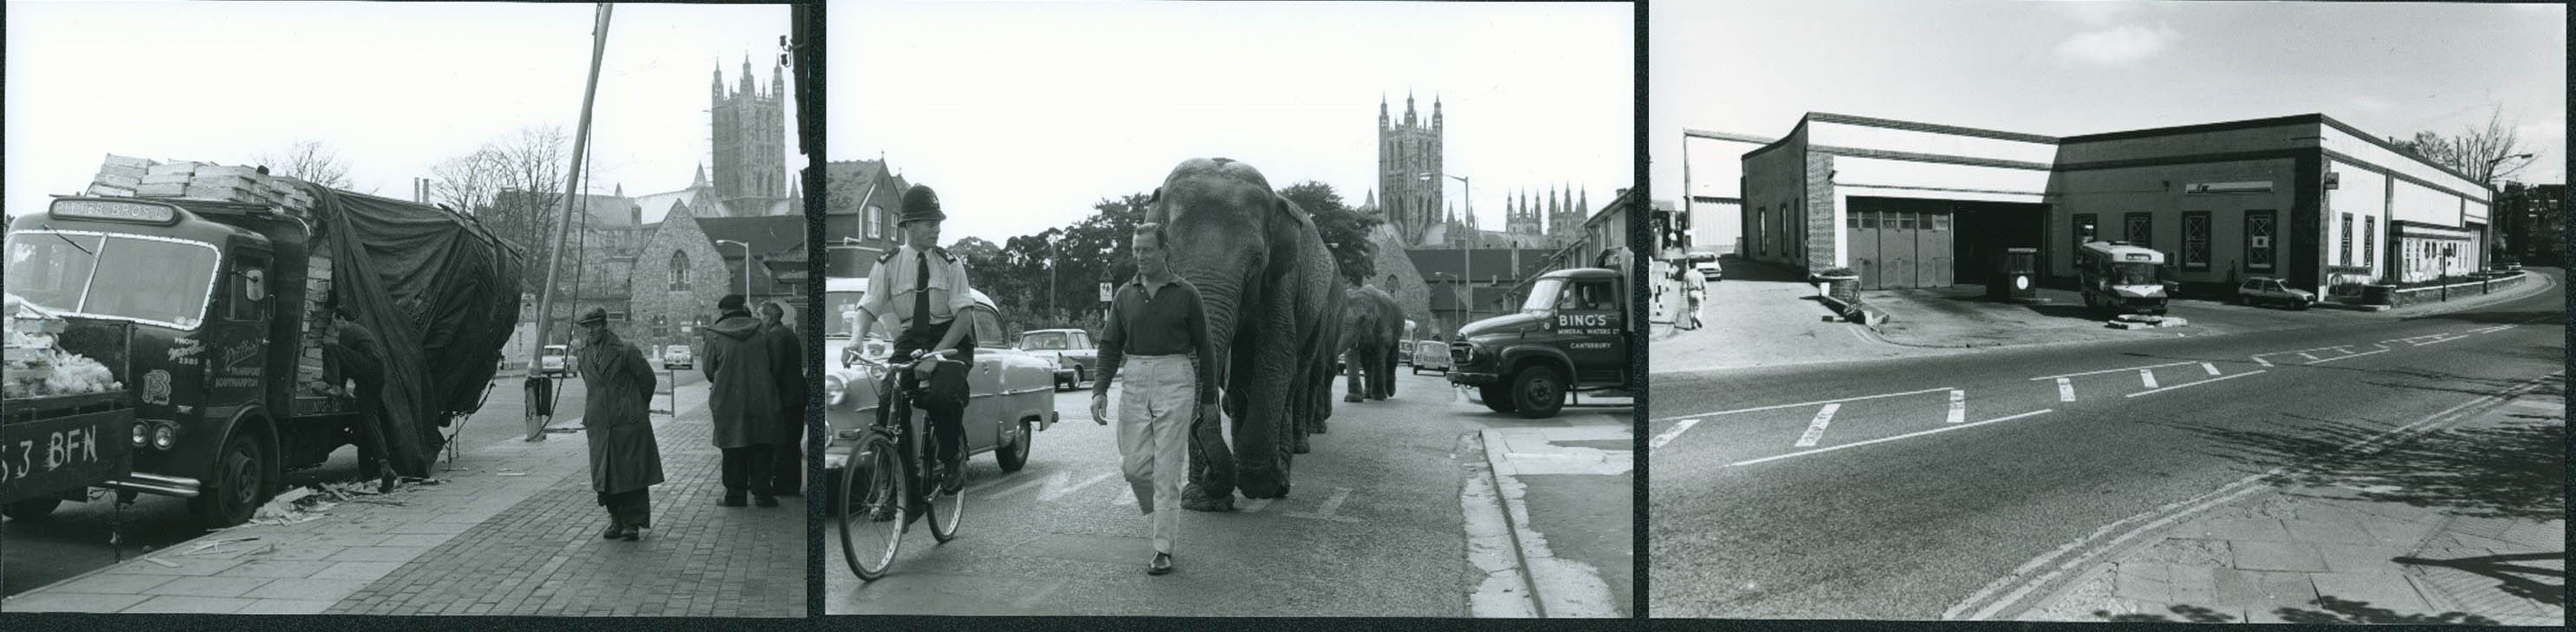 three images left to right: A black and white photograph of a delivery van parked up on a road, with the load on the back of the van spilling over in to the street. A black and white photograph of an elephant being paraded through Canterbury High Street. A man walks in front of the elephant, talking to a policeman in uniform riding a bicycle. A black and white photograph of a garage with a van in the driveway.